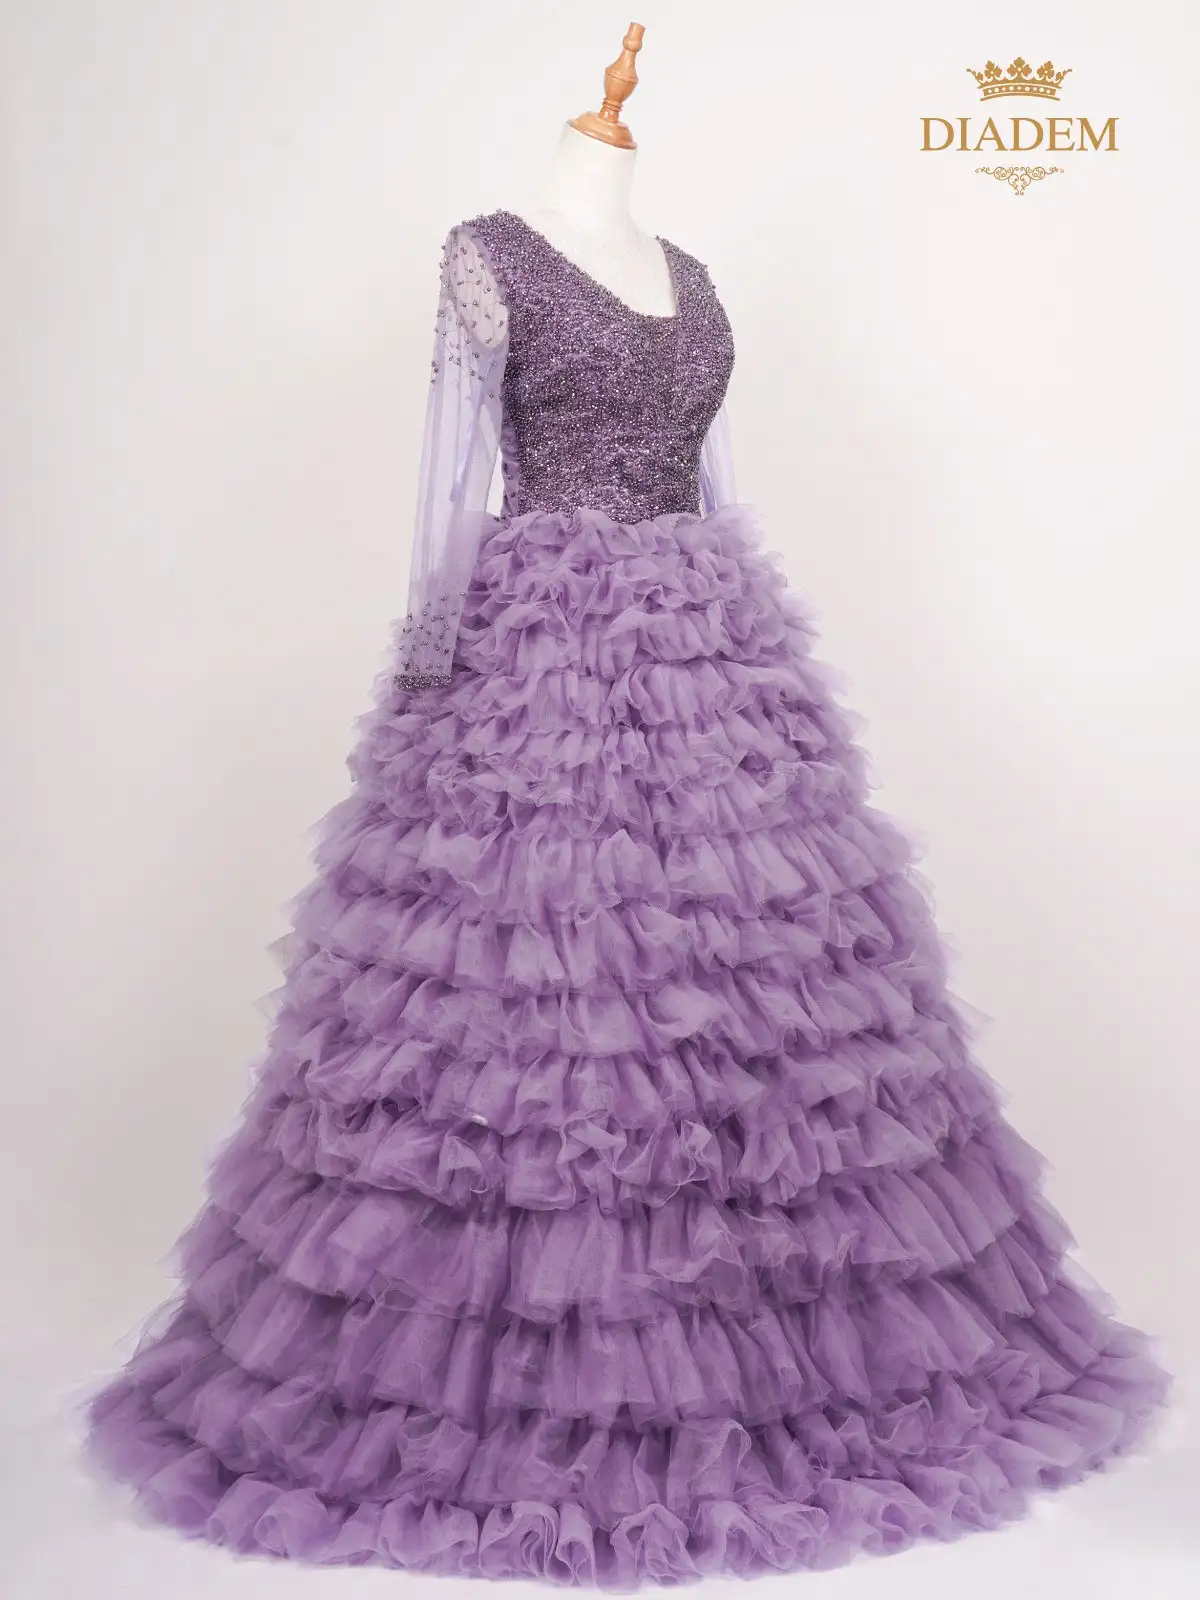 Lavender Gown Embellished With Crystal Beads And Frilled Bottom